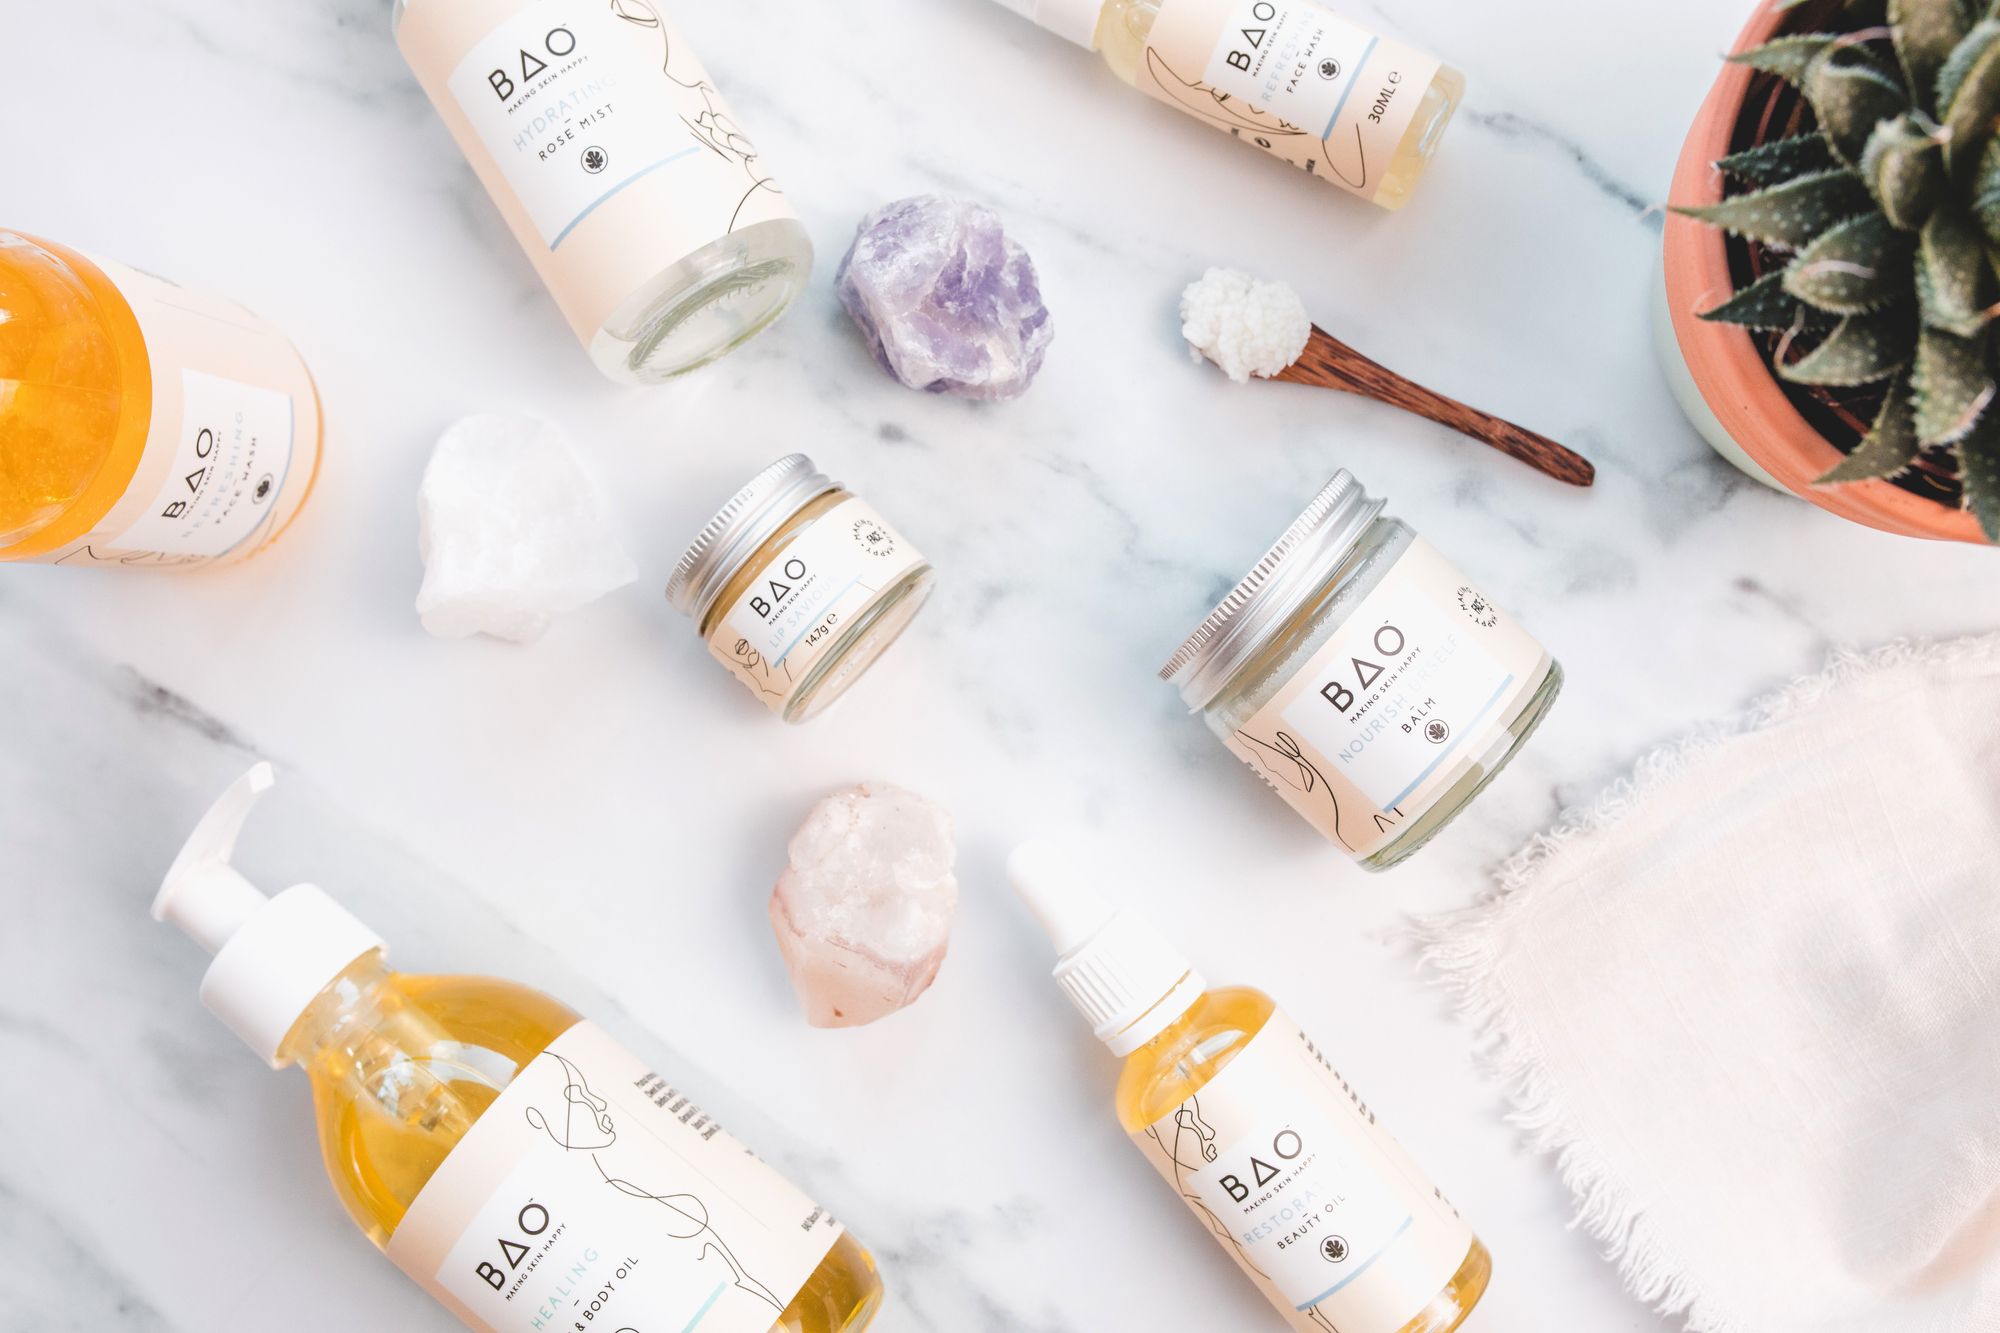 Bottles and pots from the skincare range at BAO